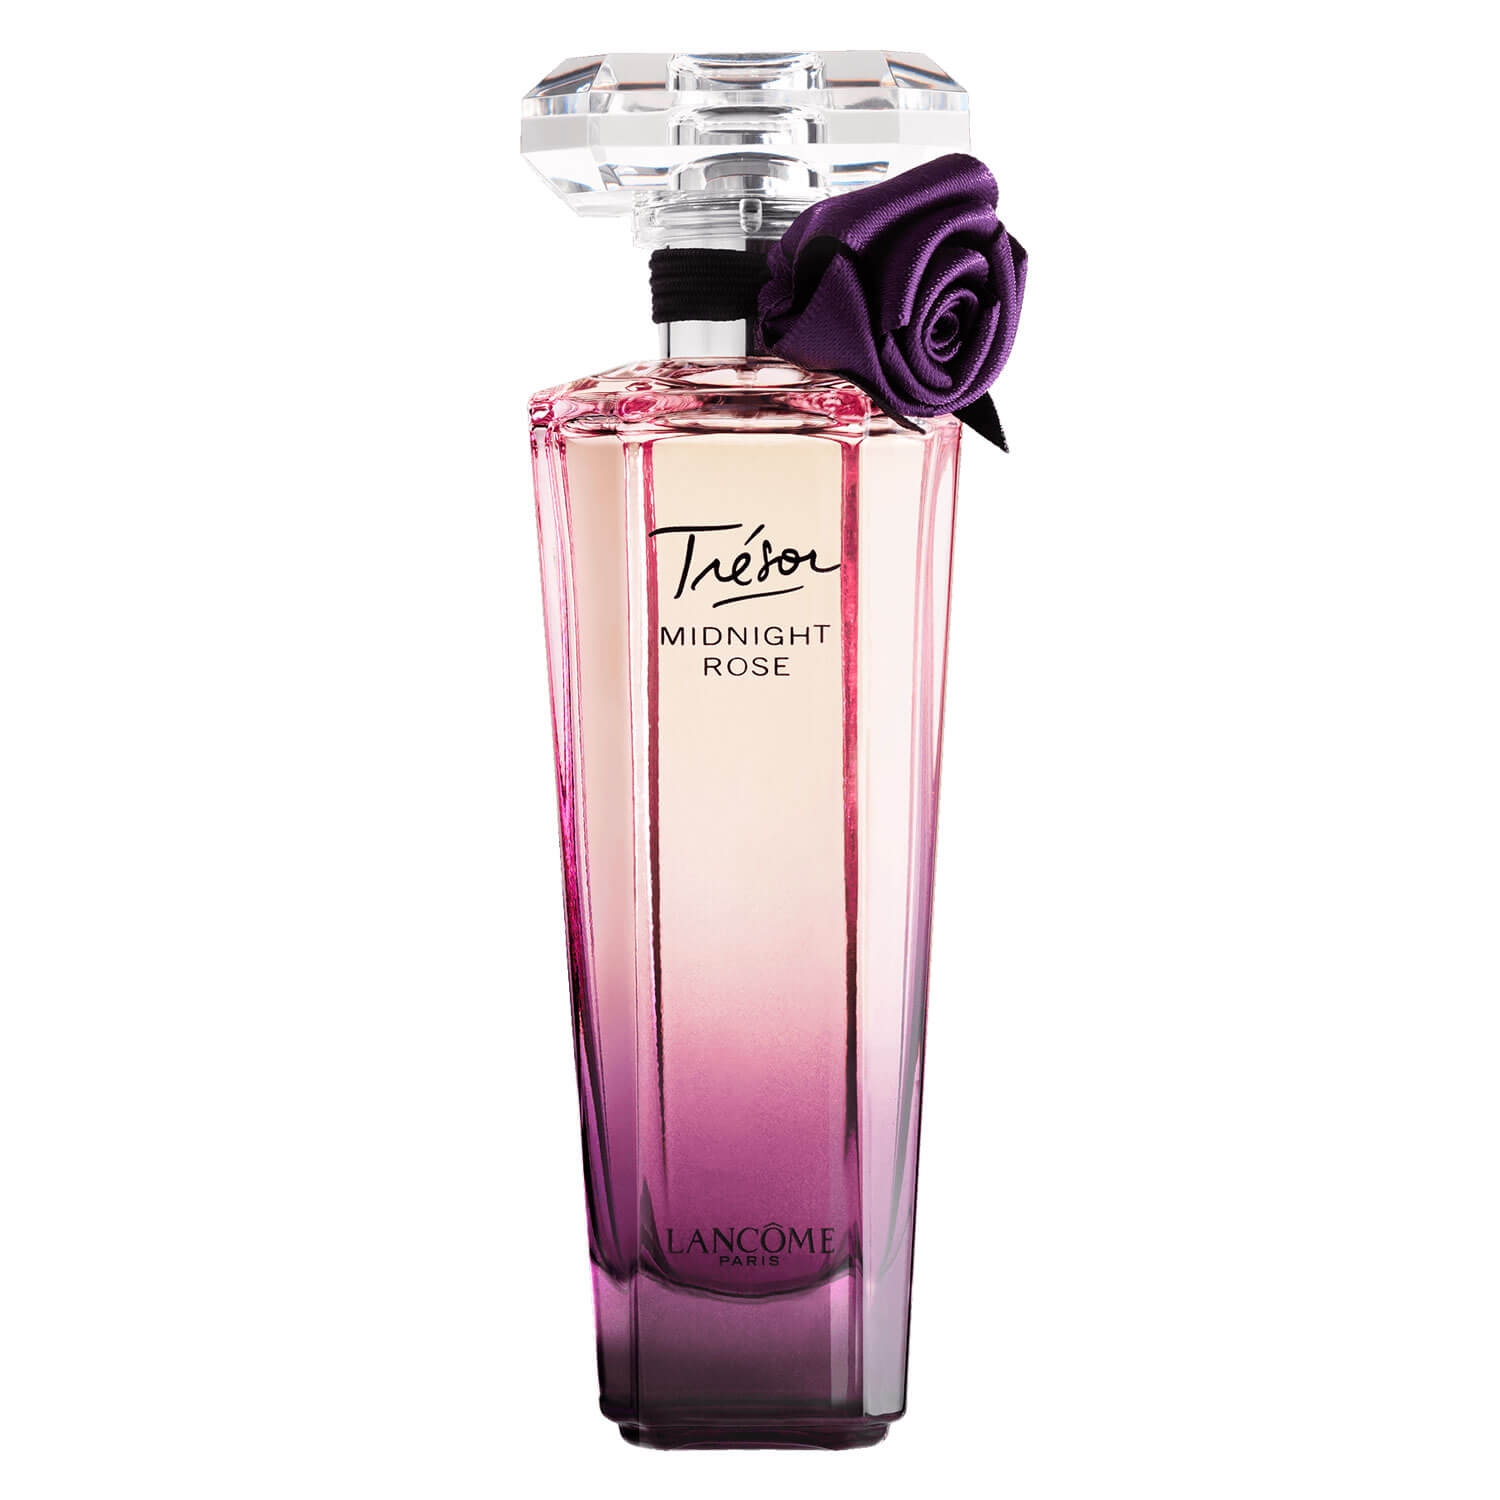 Product image from Trésor - Midnight Rose EdP